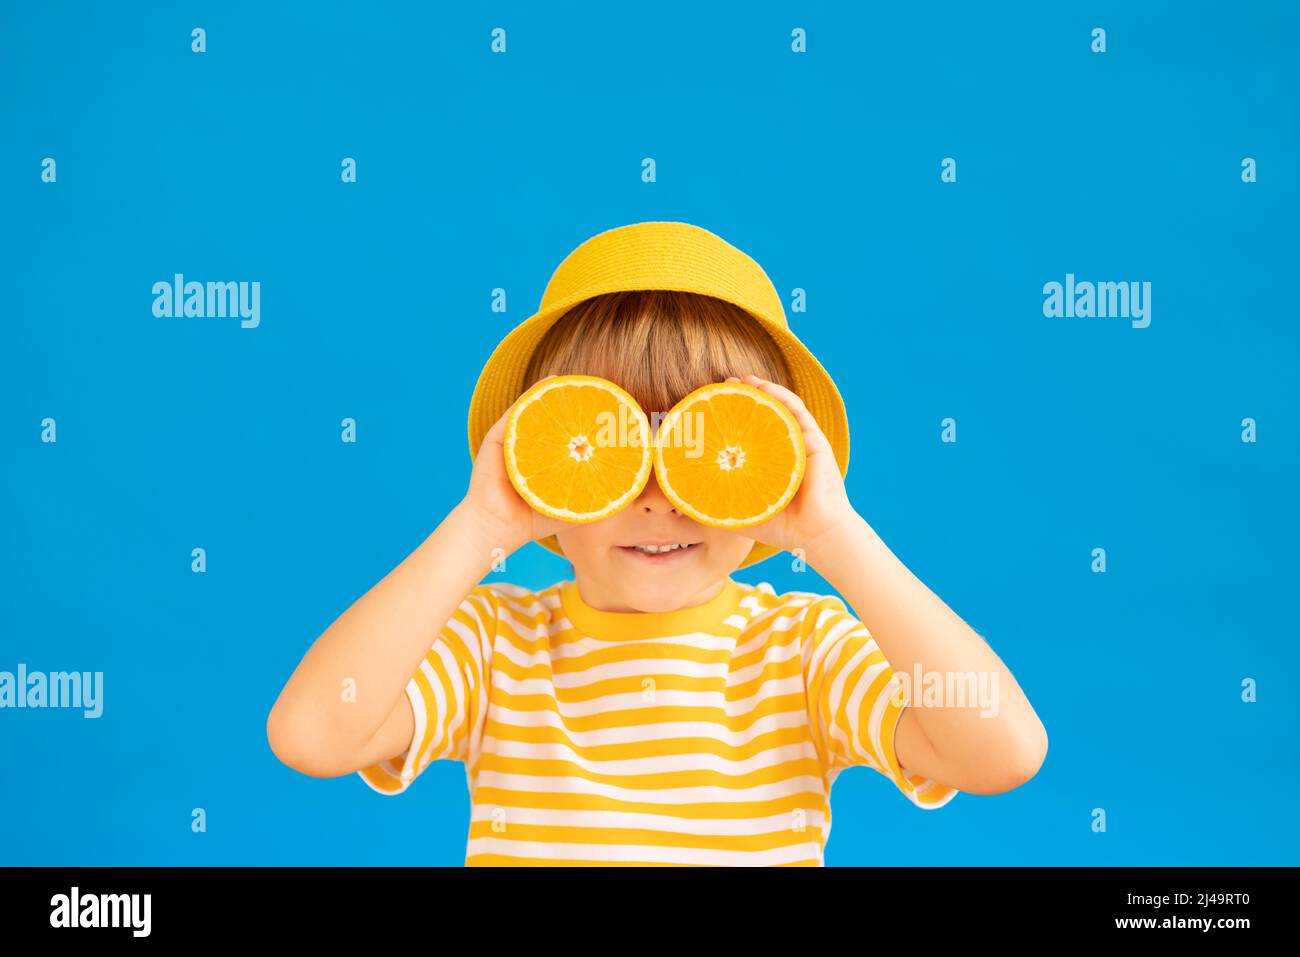 Happy child holding slices of orange fruit like sunglasses. Kid wearing striped yellow t-shirt against blue paper background. Healthy eating and summe Stock Photo